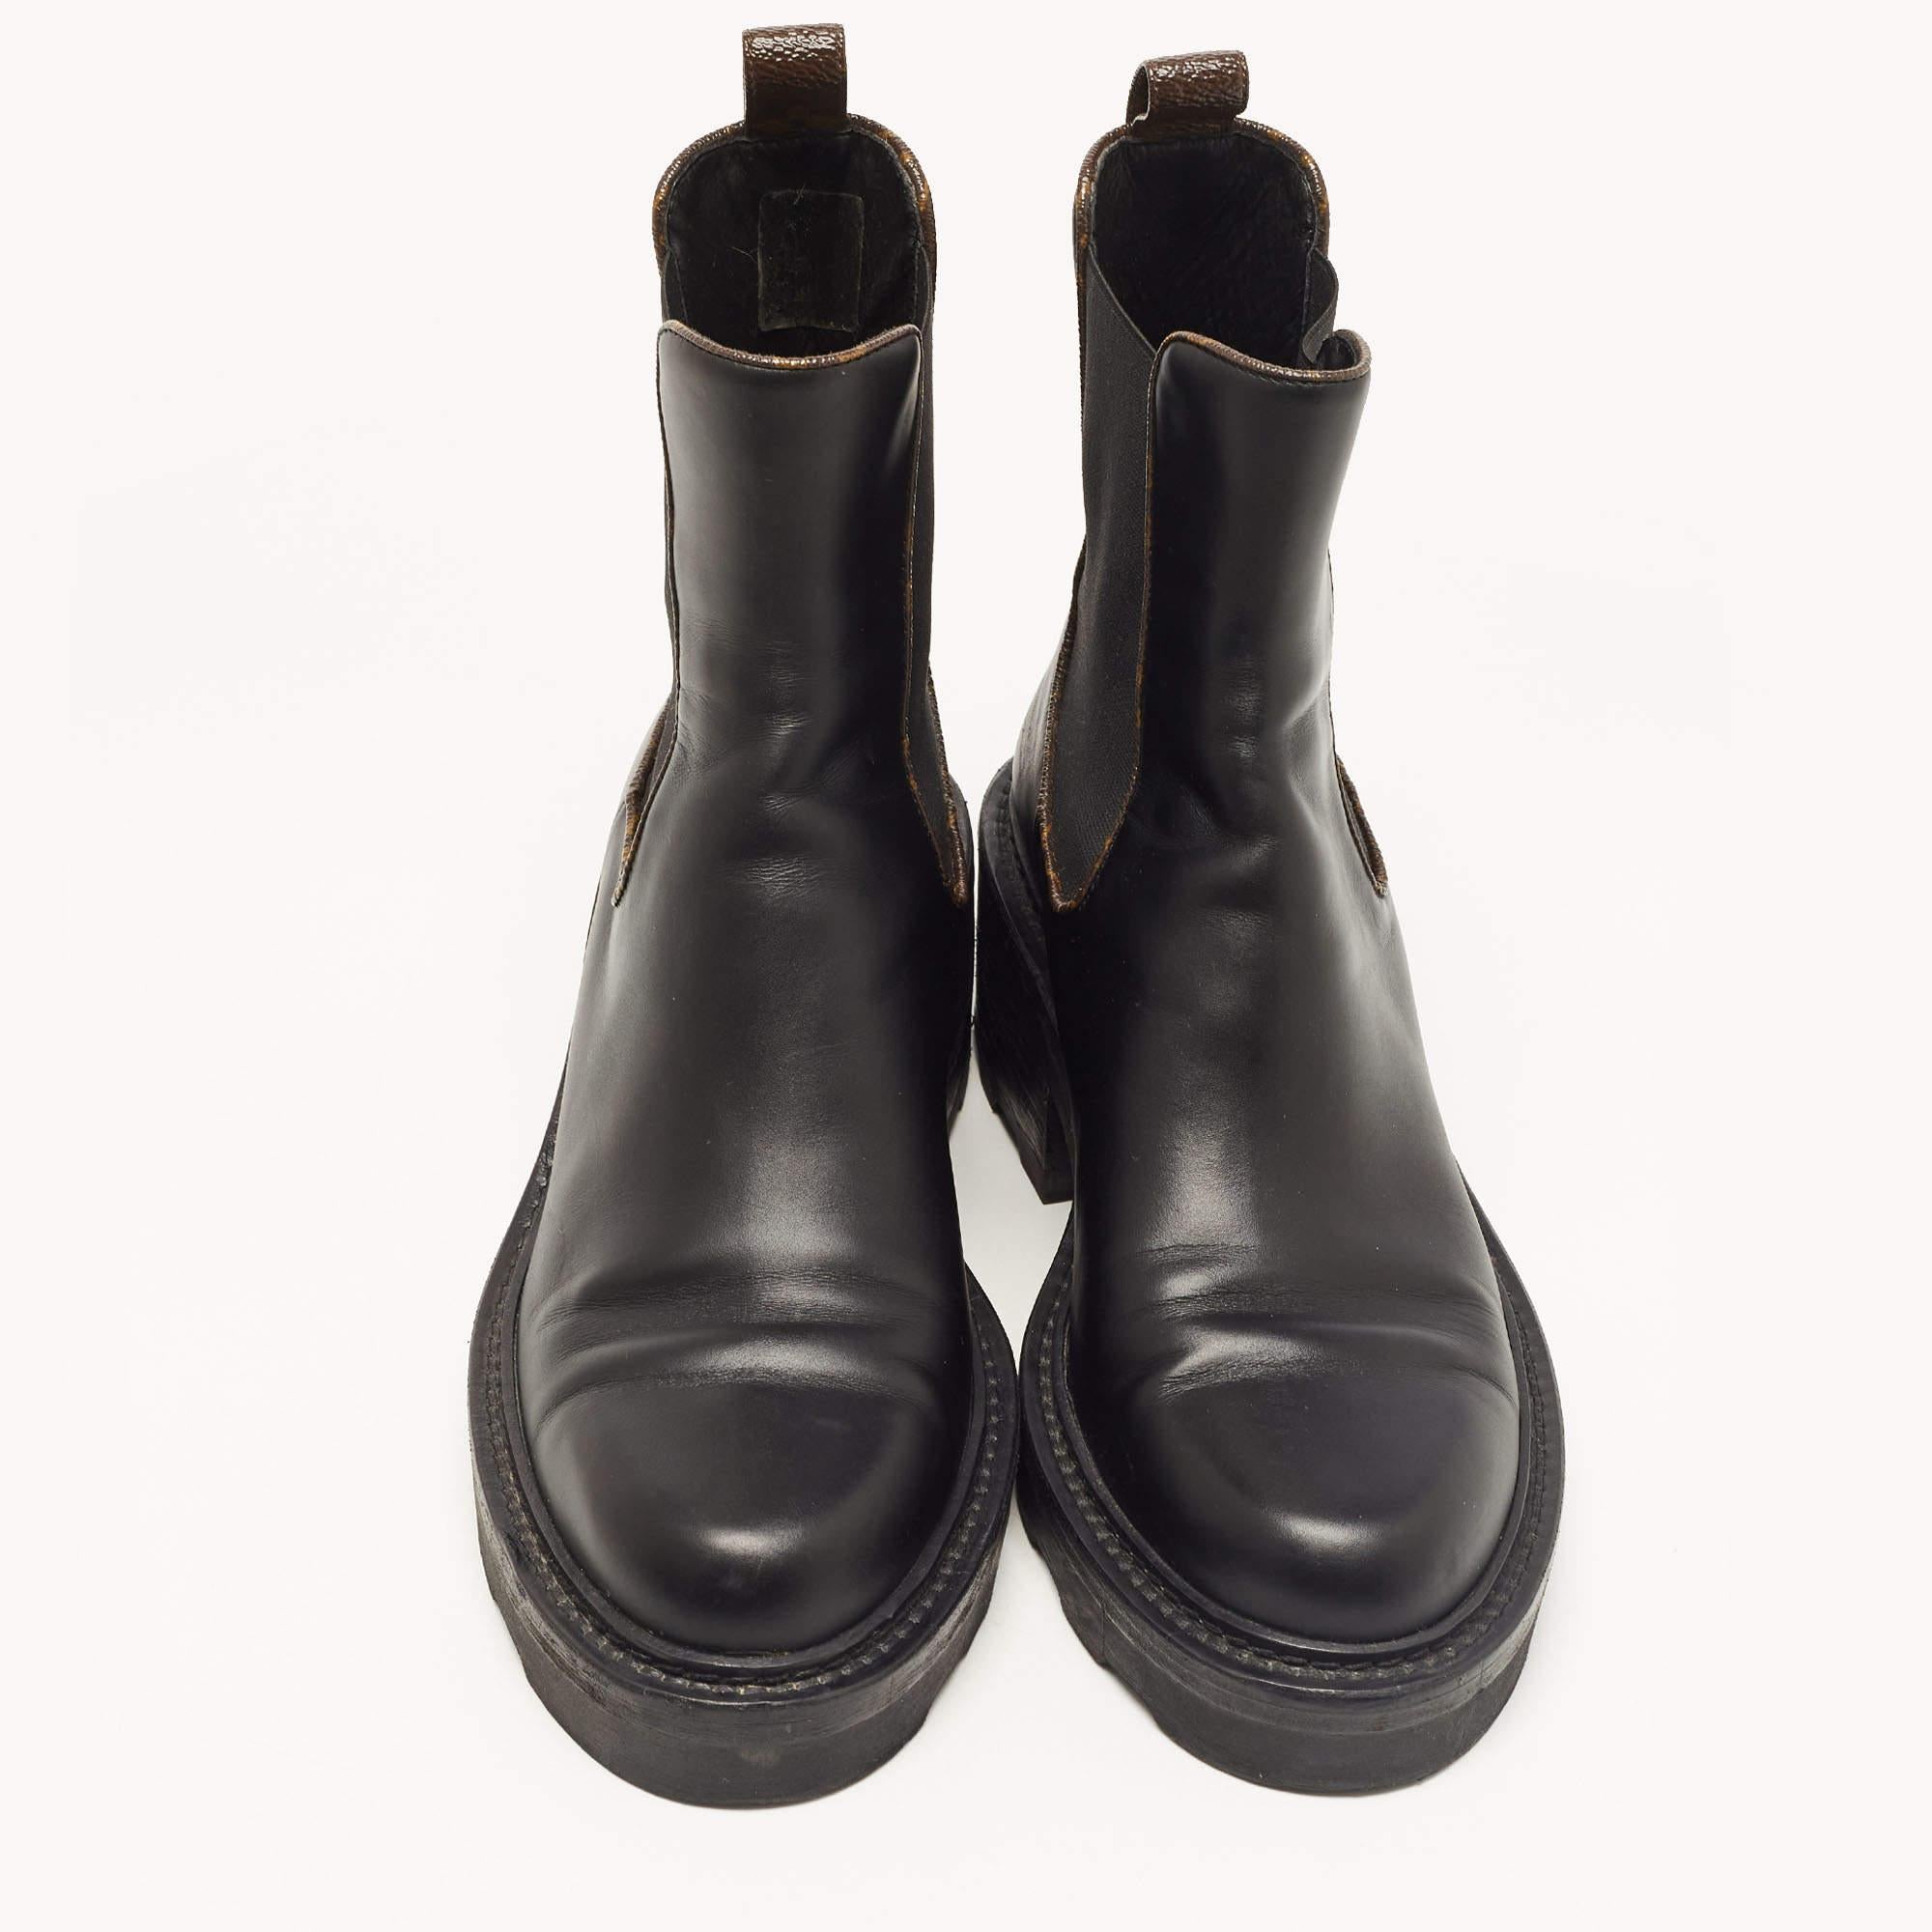 Complete a smart outfit with these black combat boots from Louis Vuitton. They're fashioned in leather and have elastic panels and Monogram canvas trims.

